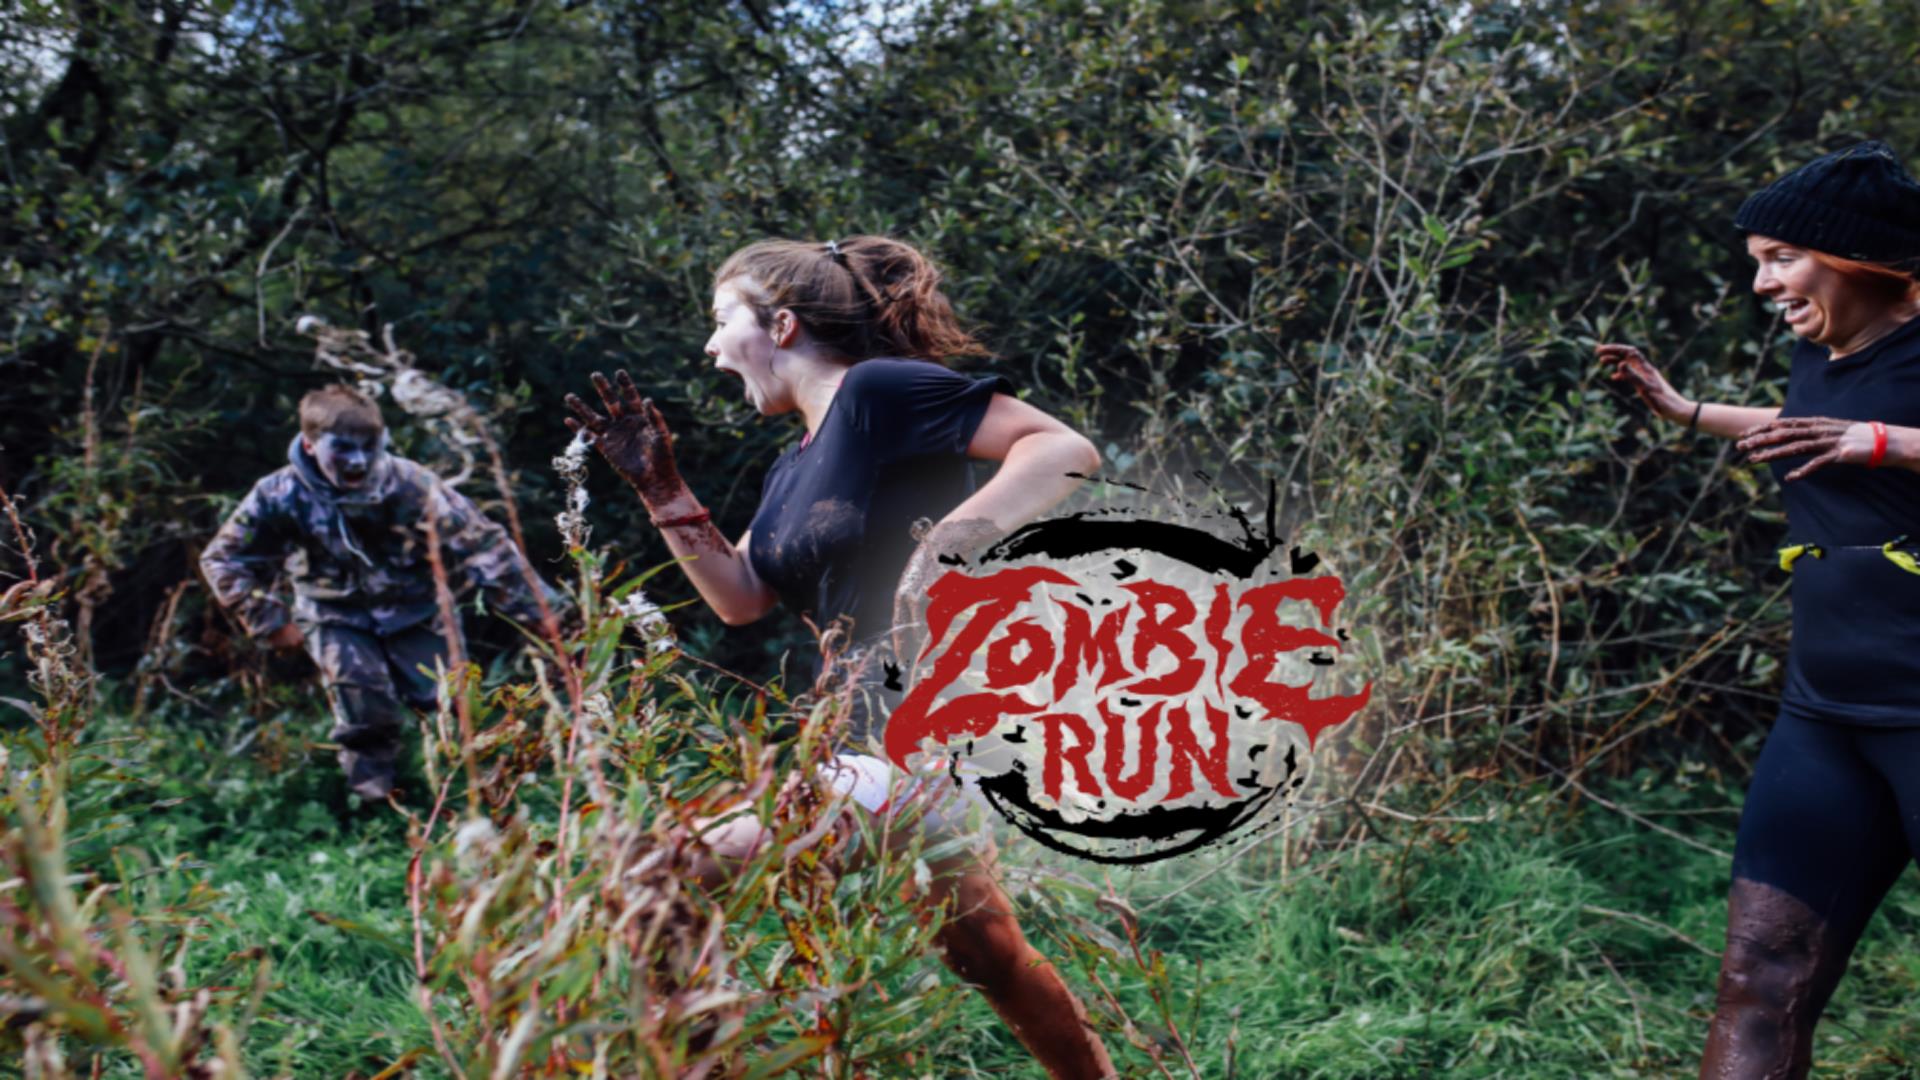 This is promotional poster for the 'Zombie Run' event organised by the Jungle NI. The poster displays participating runners being chased by a person d